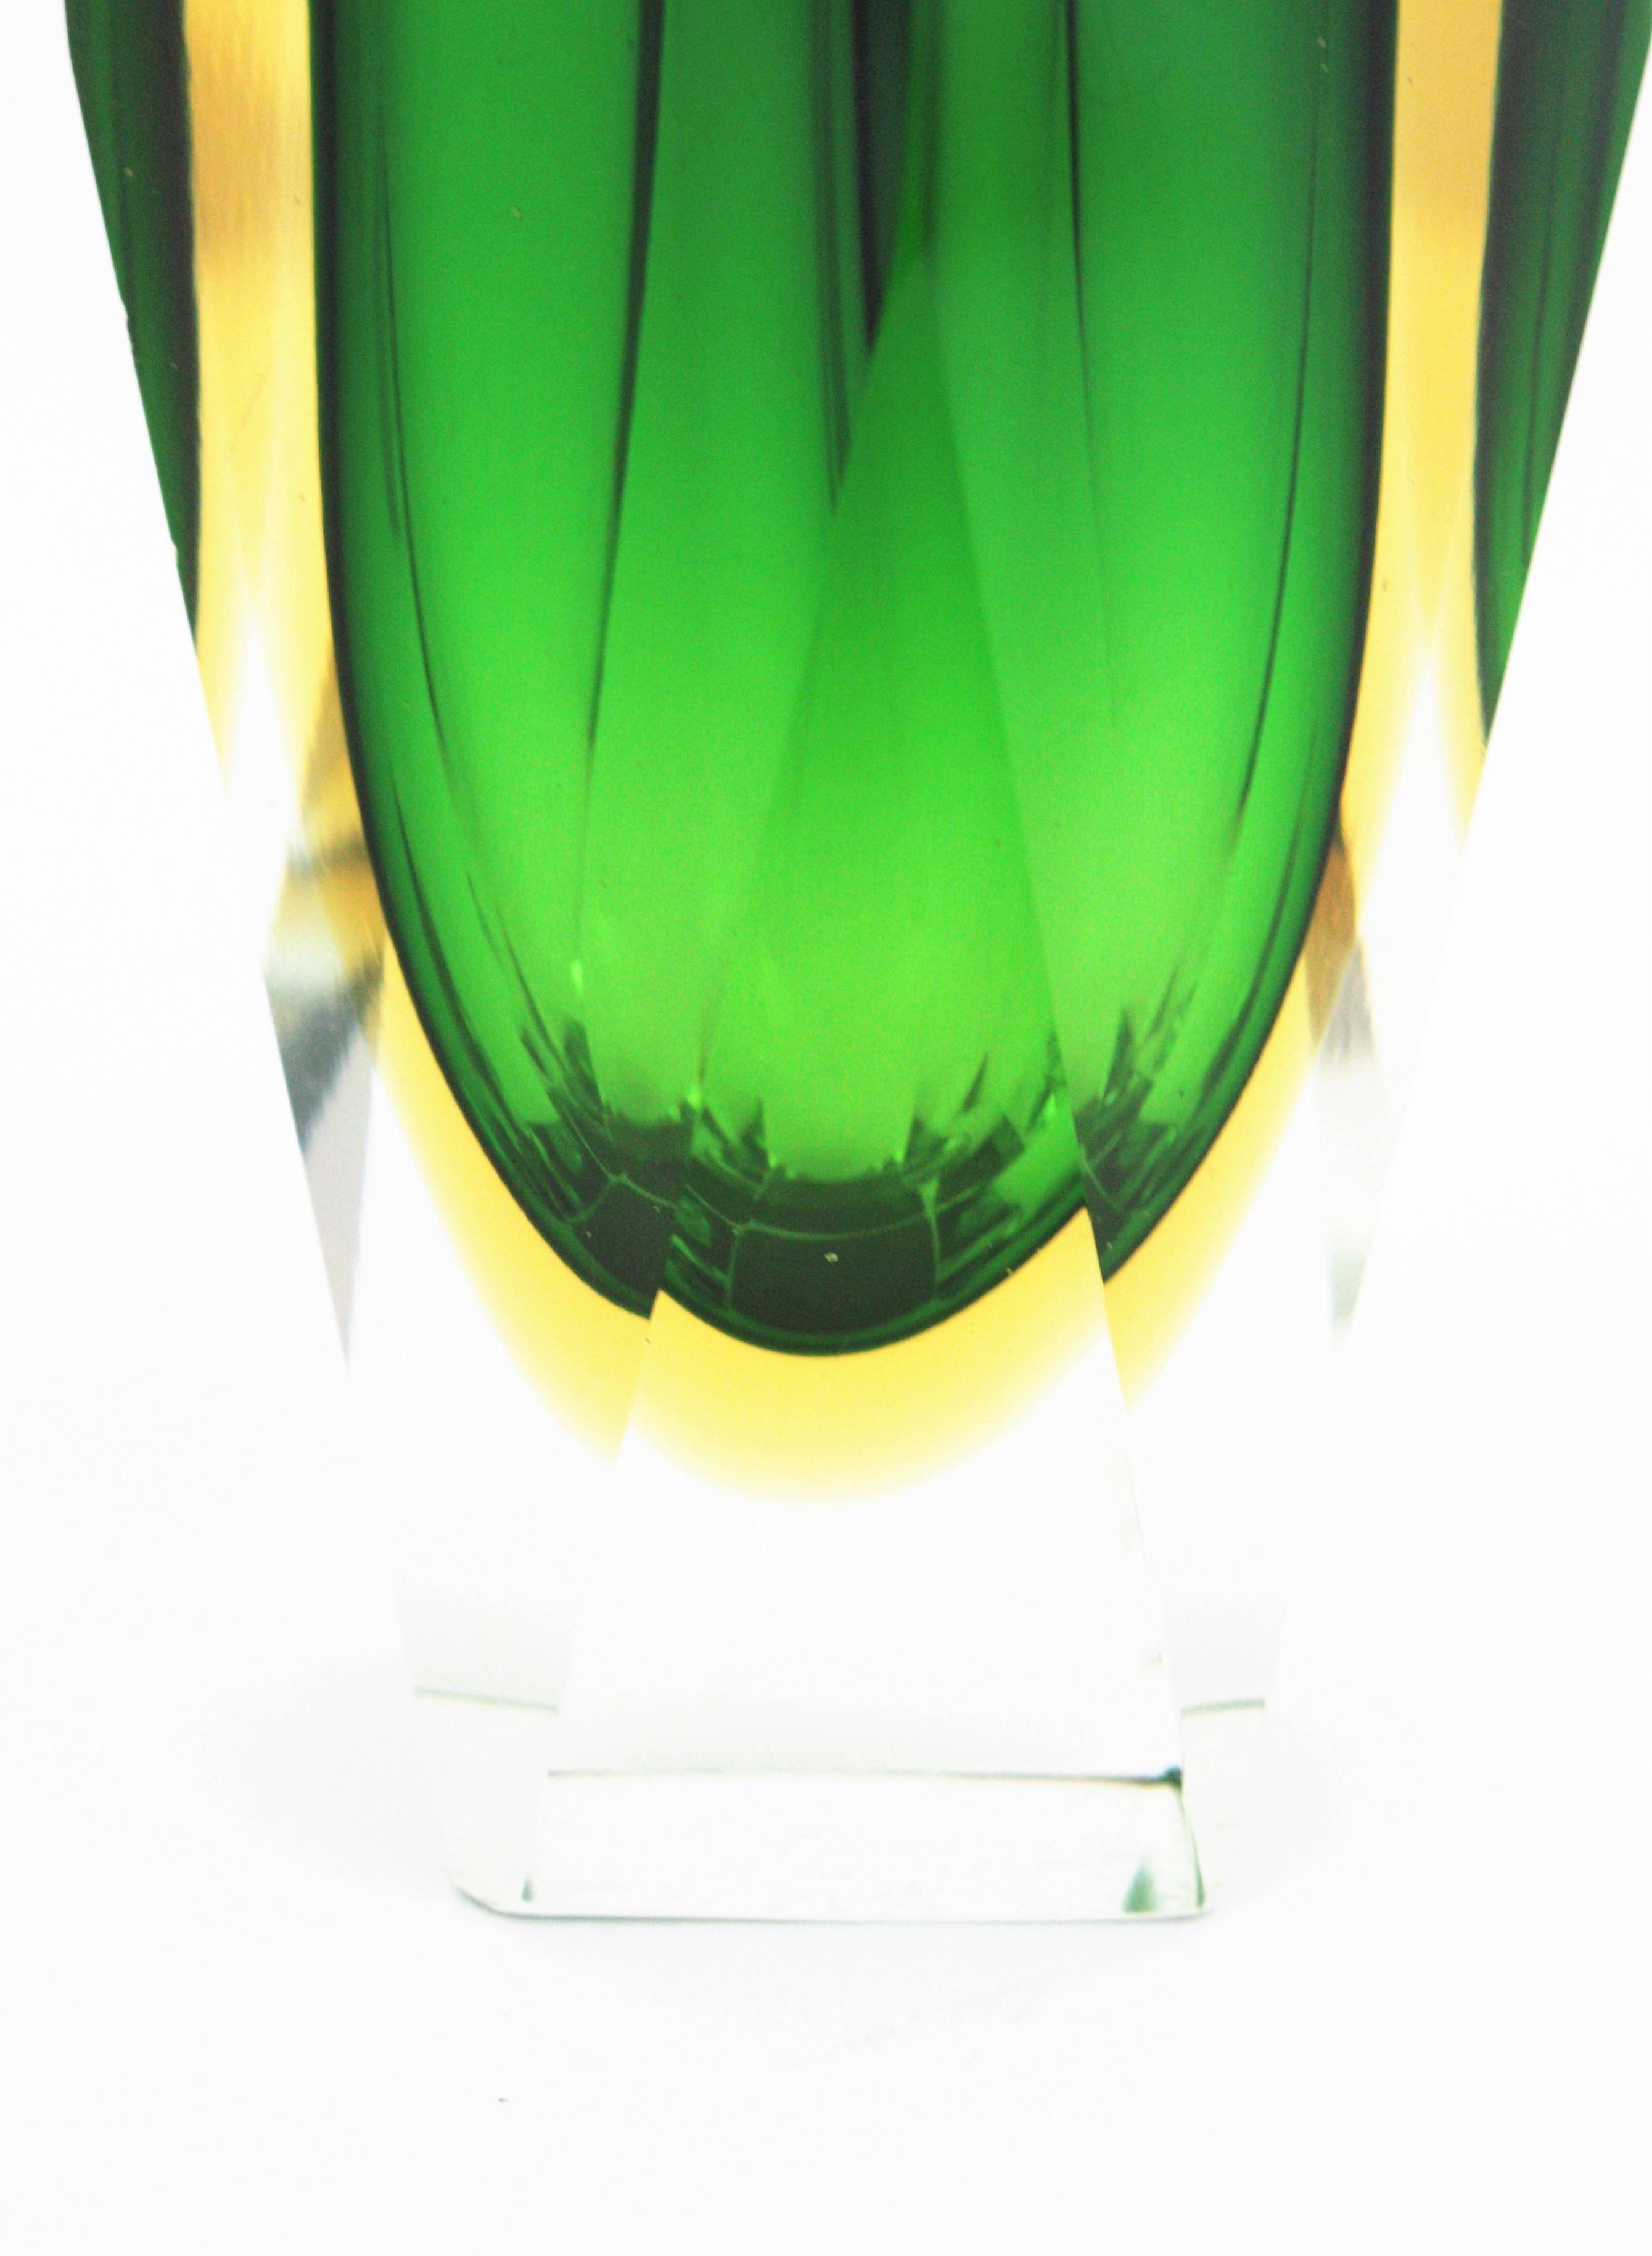 Giant Mandruzzato Murano Sommerso Green Yellow Faceted Art Glass Vase For Sale 3